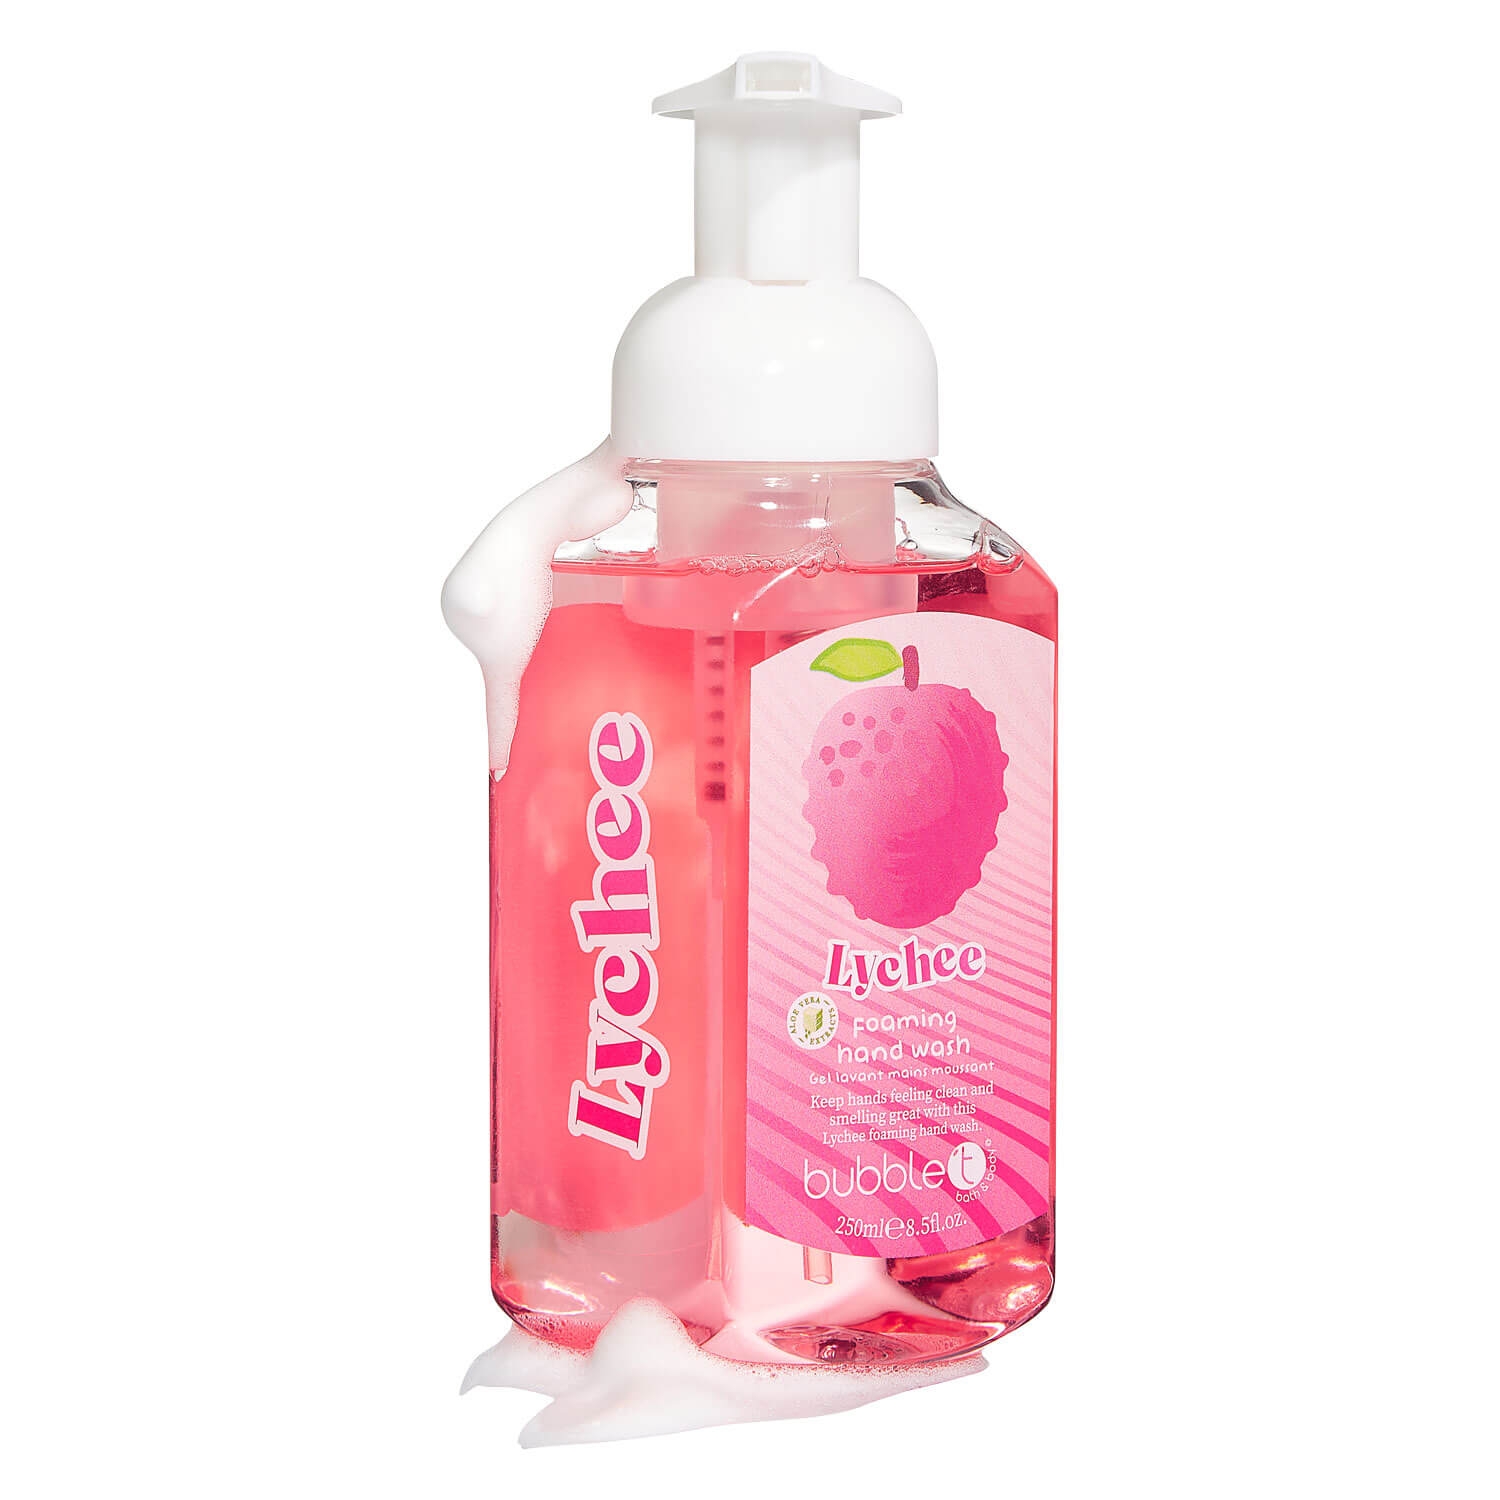 Product image from bubble t - Lychee Foaming Hand Wash